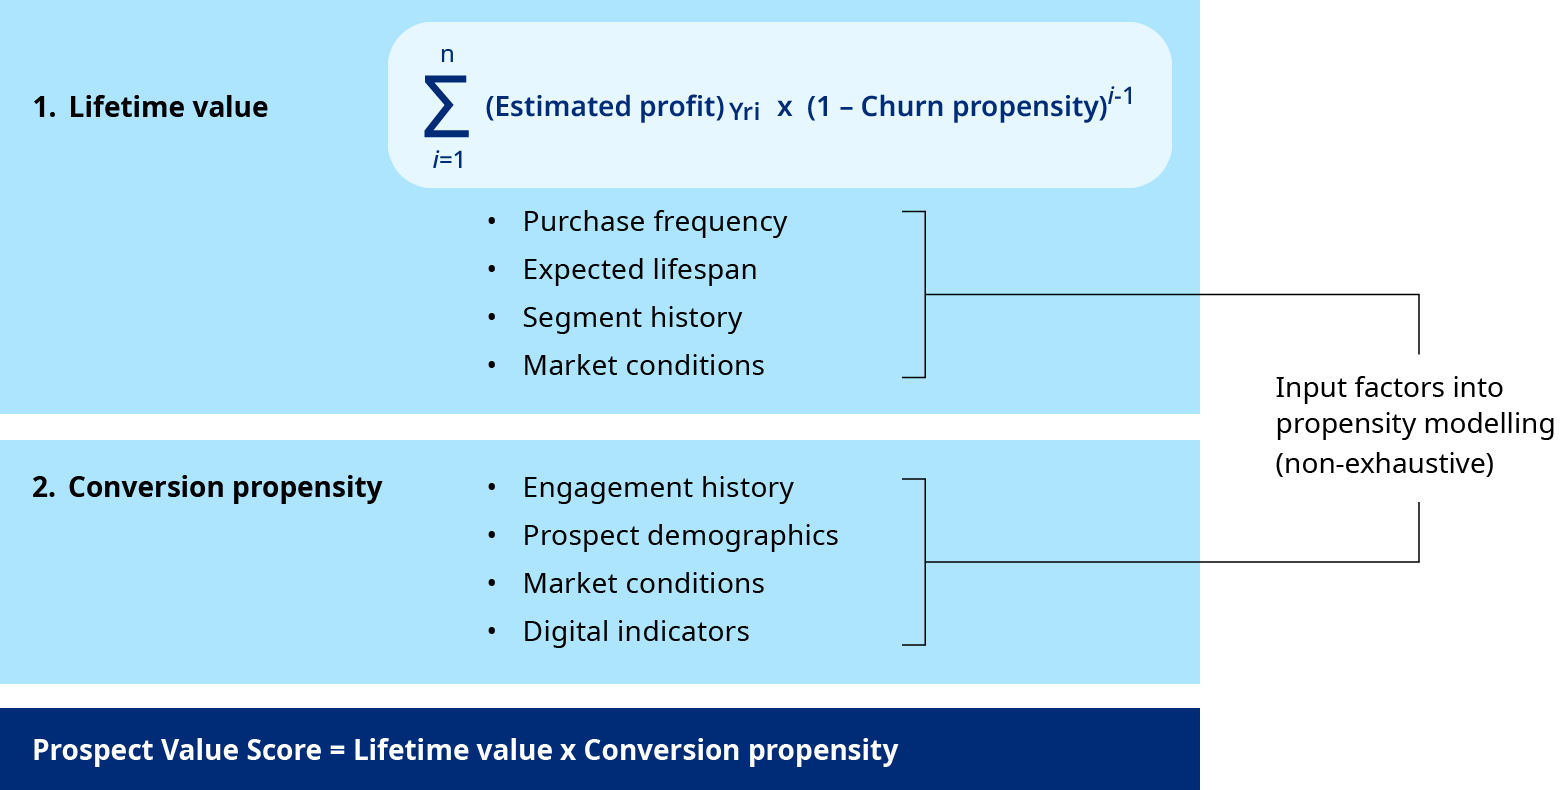 Lifetime value is an estimation of the "value" that each prospect will bring to an organization, measured in profits accumulated over three years and including the propensity to churn once converted to a customer.